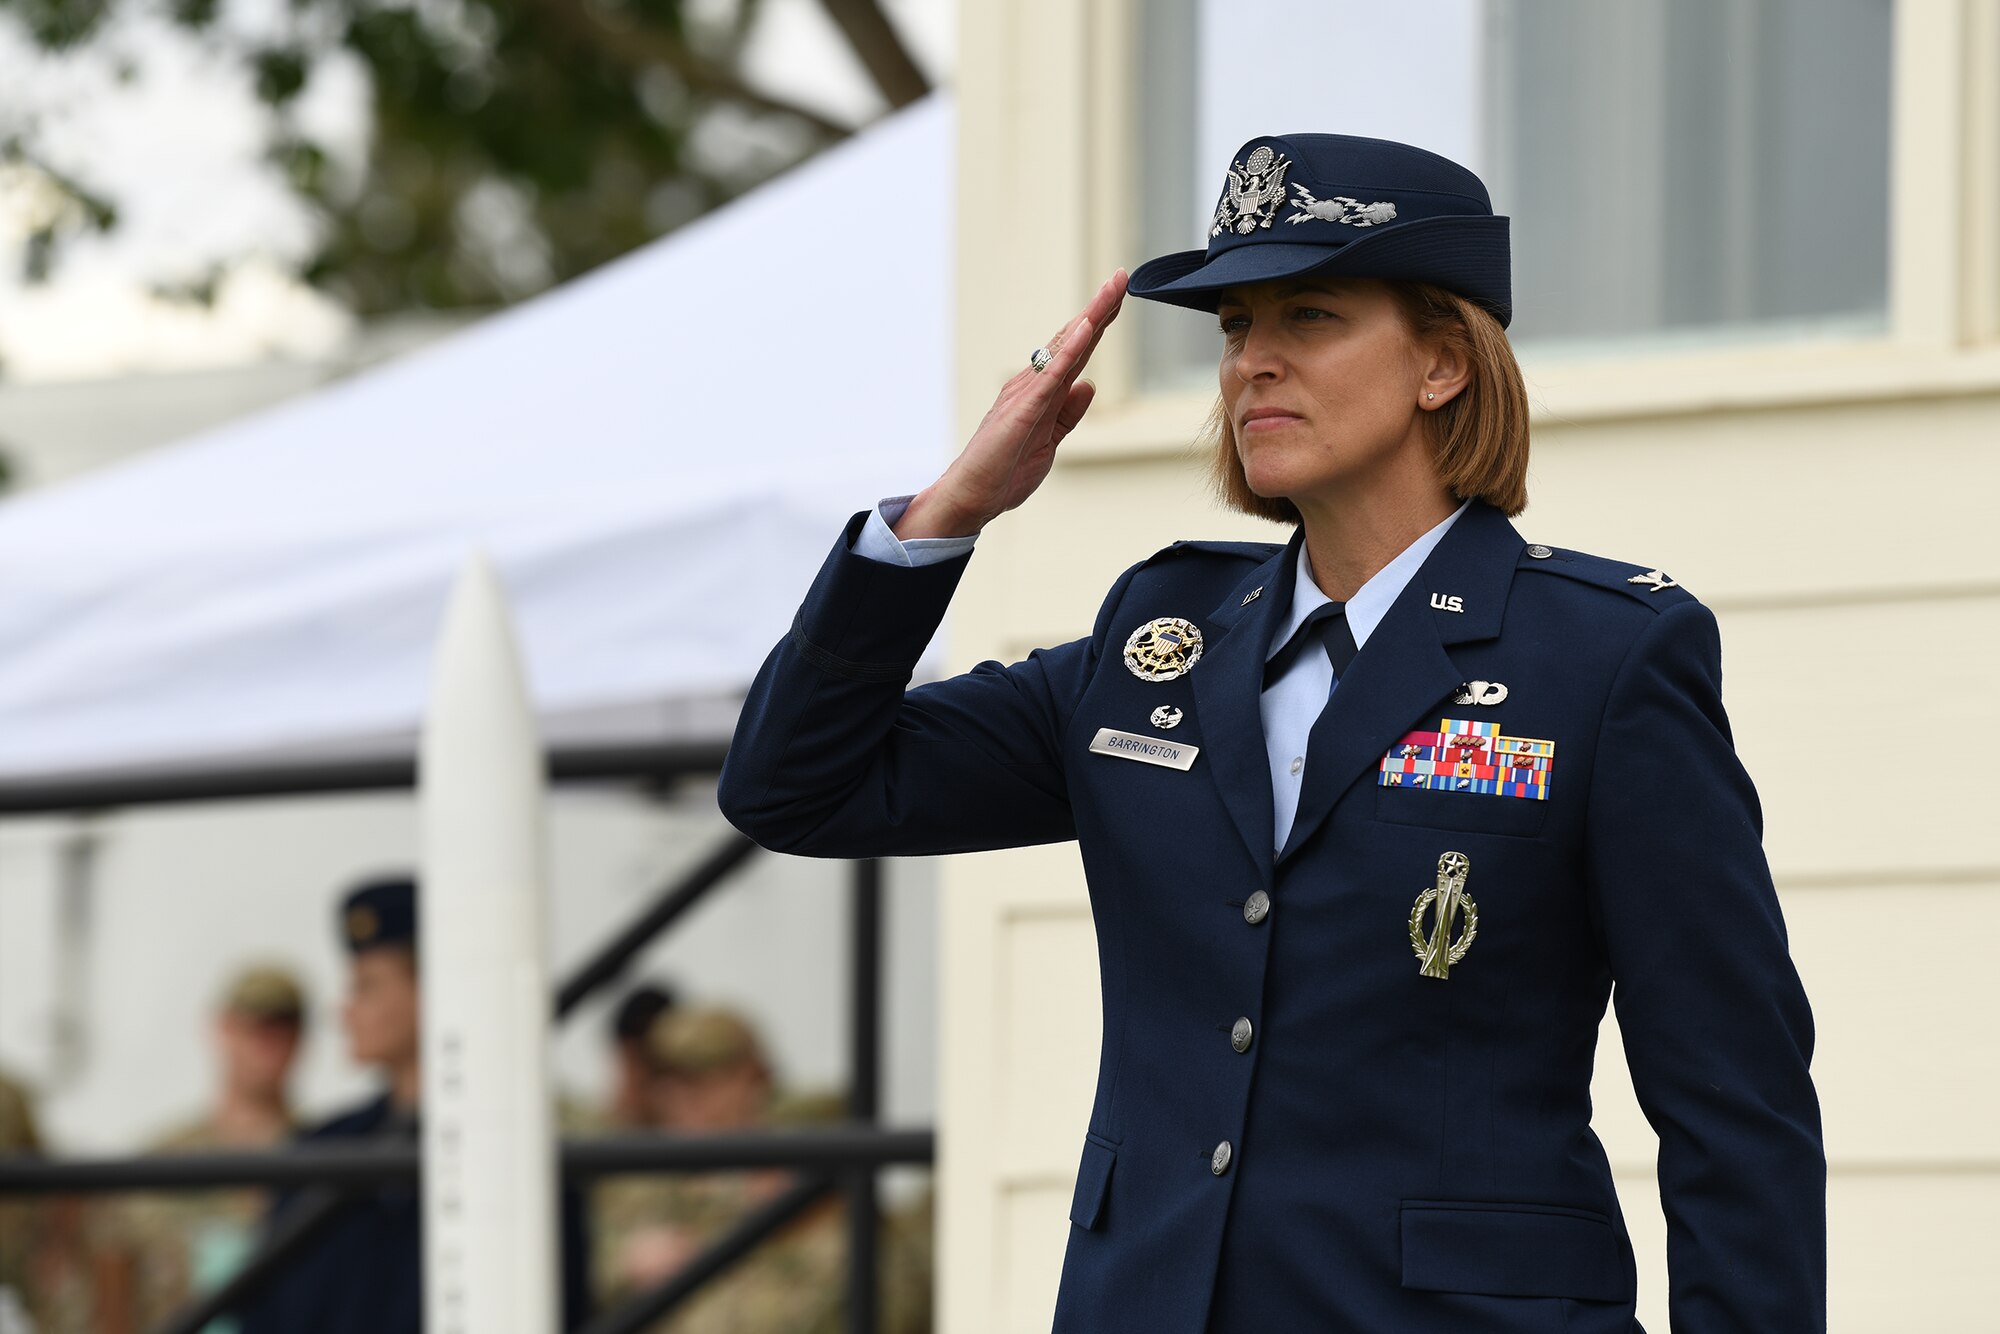 Col. Catherine Barrington, 90th Missile Wing commander, renders her first salute during the 90 MW change of command ceremony June 28, 2021, F.E. Warren Air Force Base, Wyoming. The ceremony signified the transition of command from Col. Peter Bonetti to Col. Catherine Barrington. (U.S. Air Force photo by Airman 1st Class Anthony Munoz)